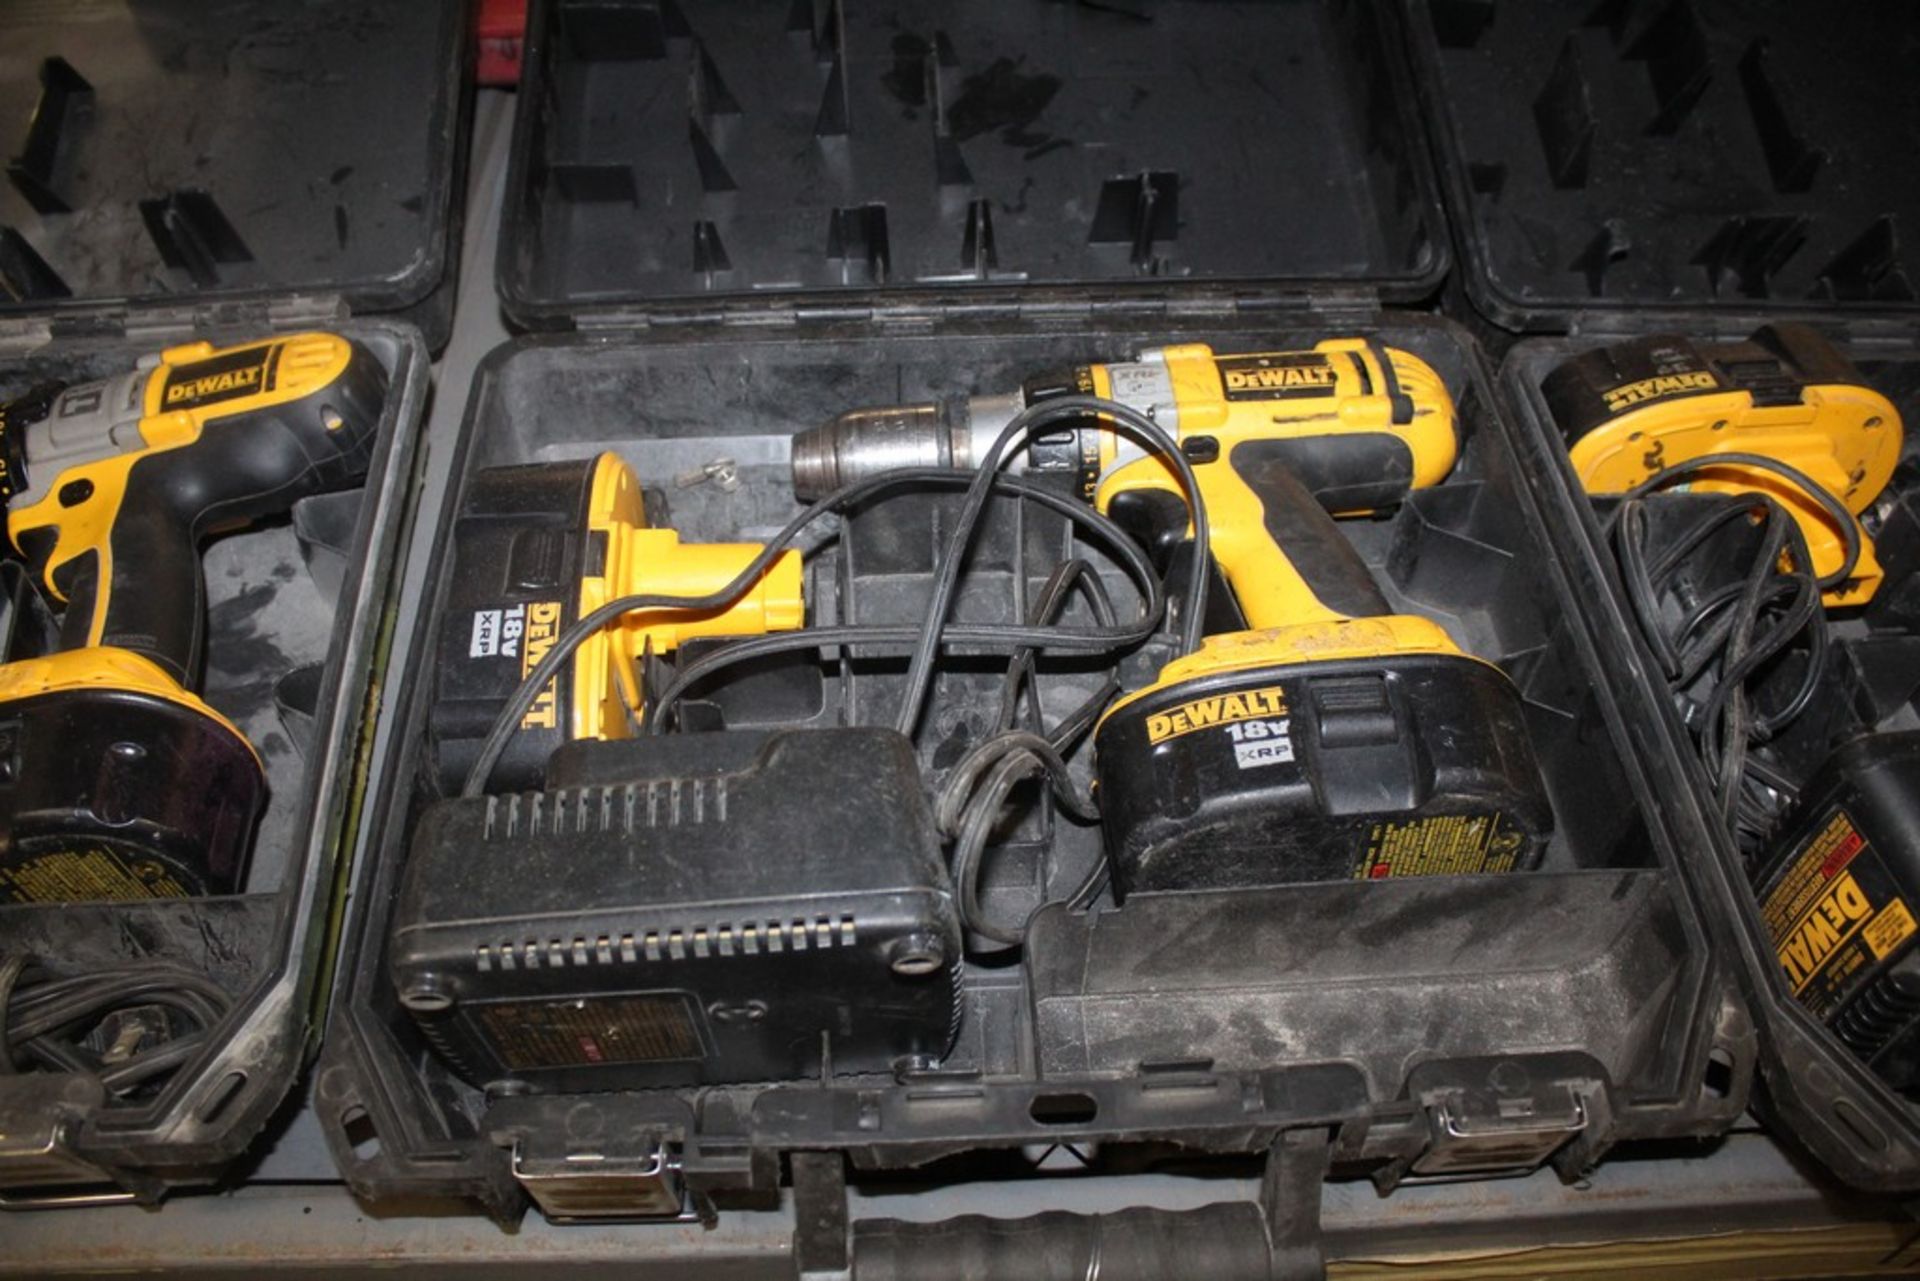 DEWALT MODEL DC988 1/2" 18-VOLT CORDLESS HAMMER DRILL WITH CASE, SPARE BATTERY, CHARGER